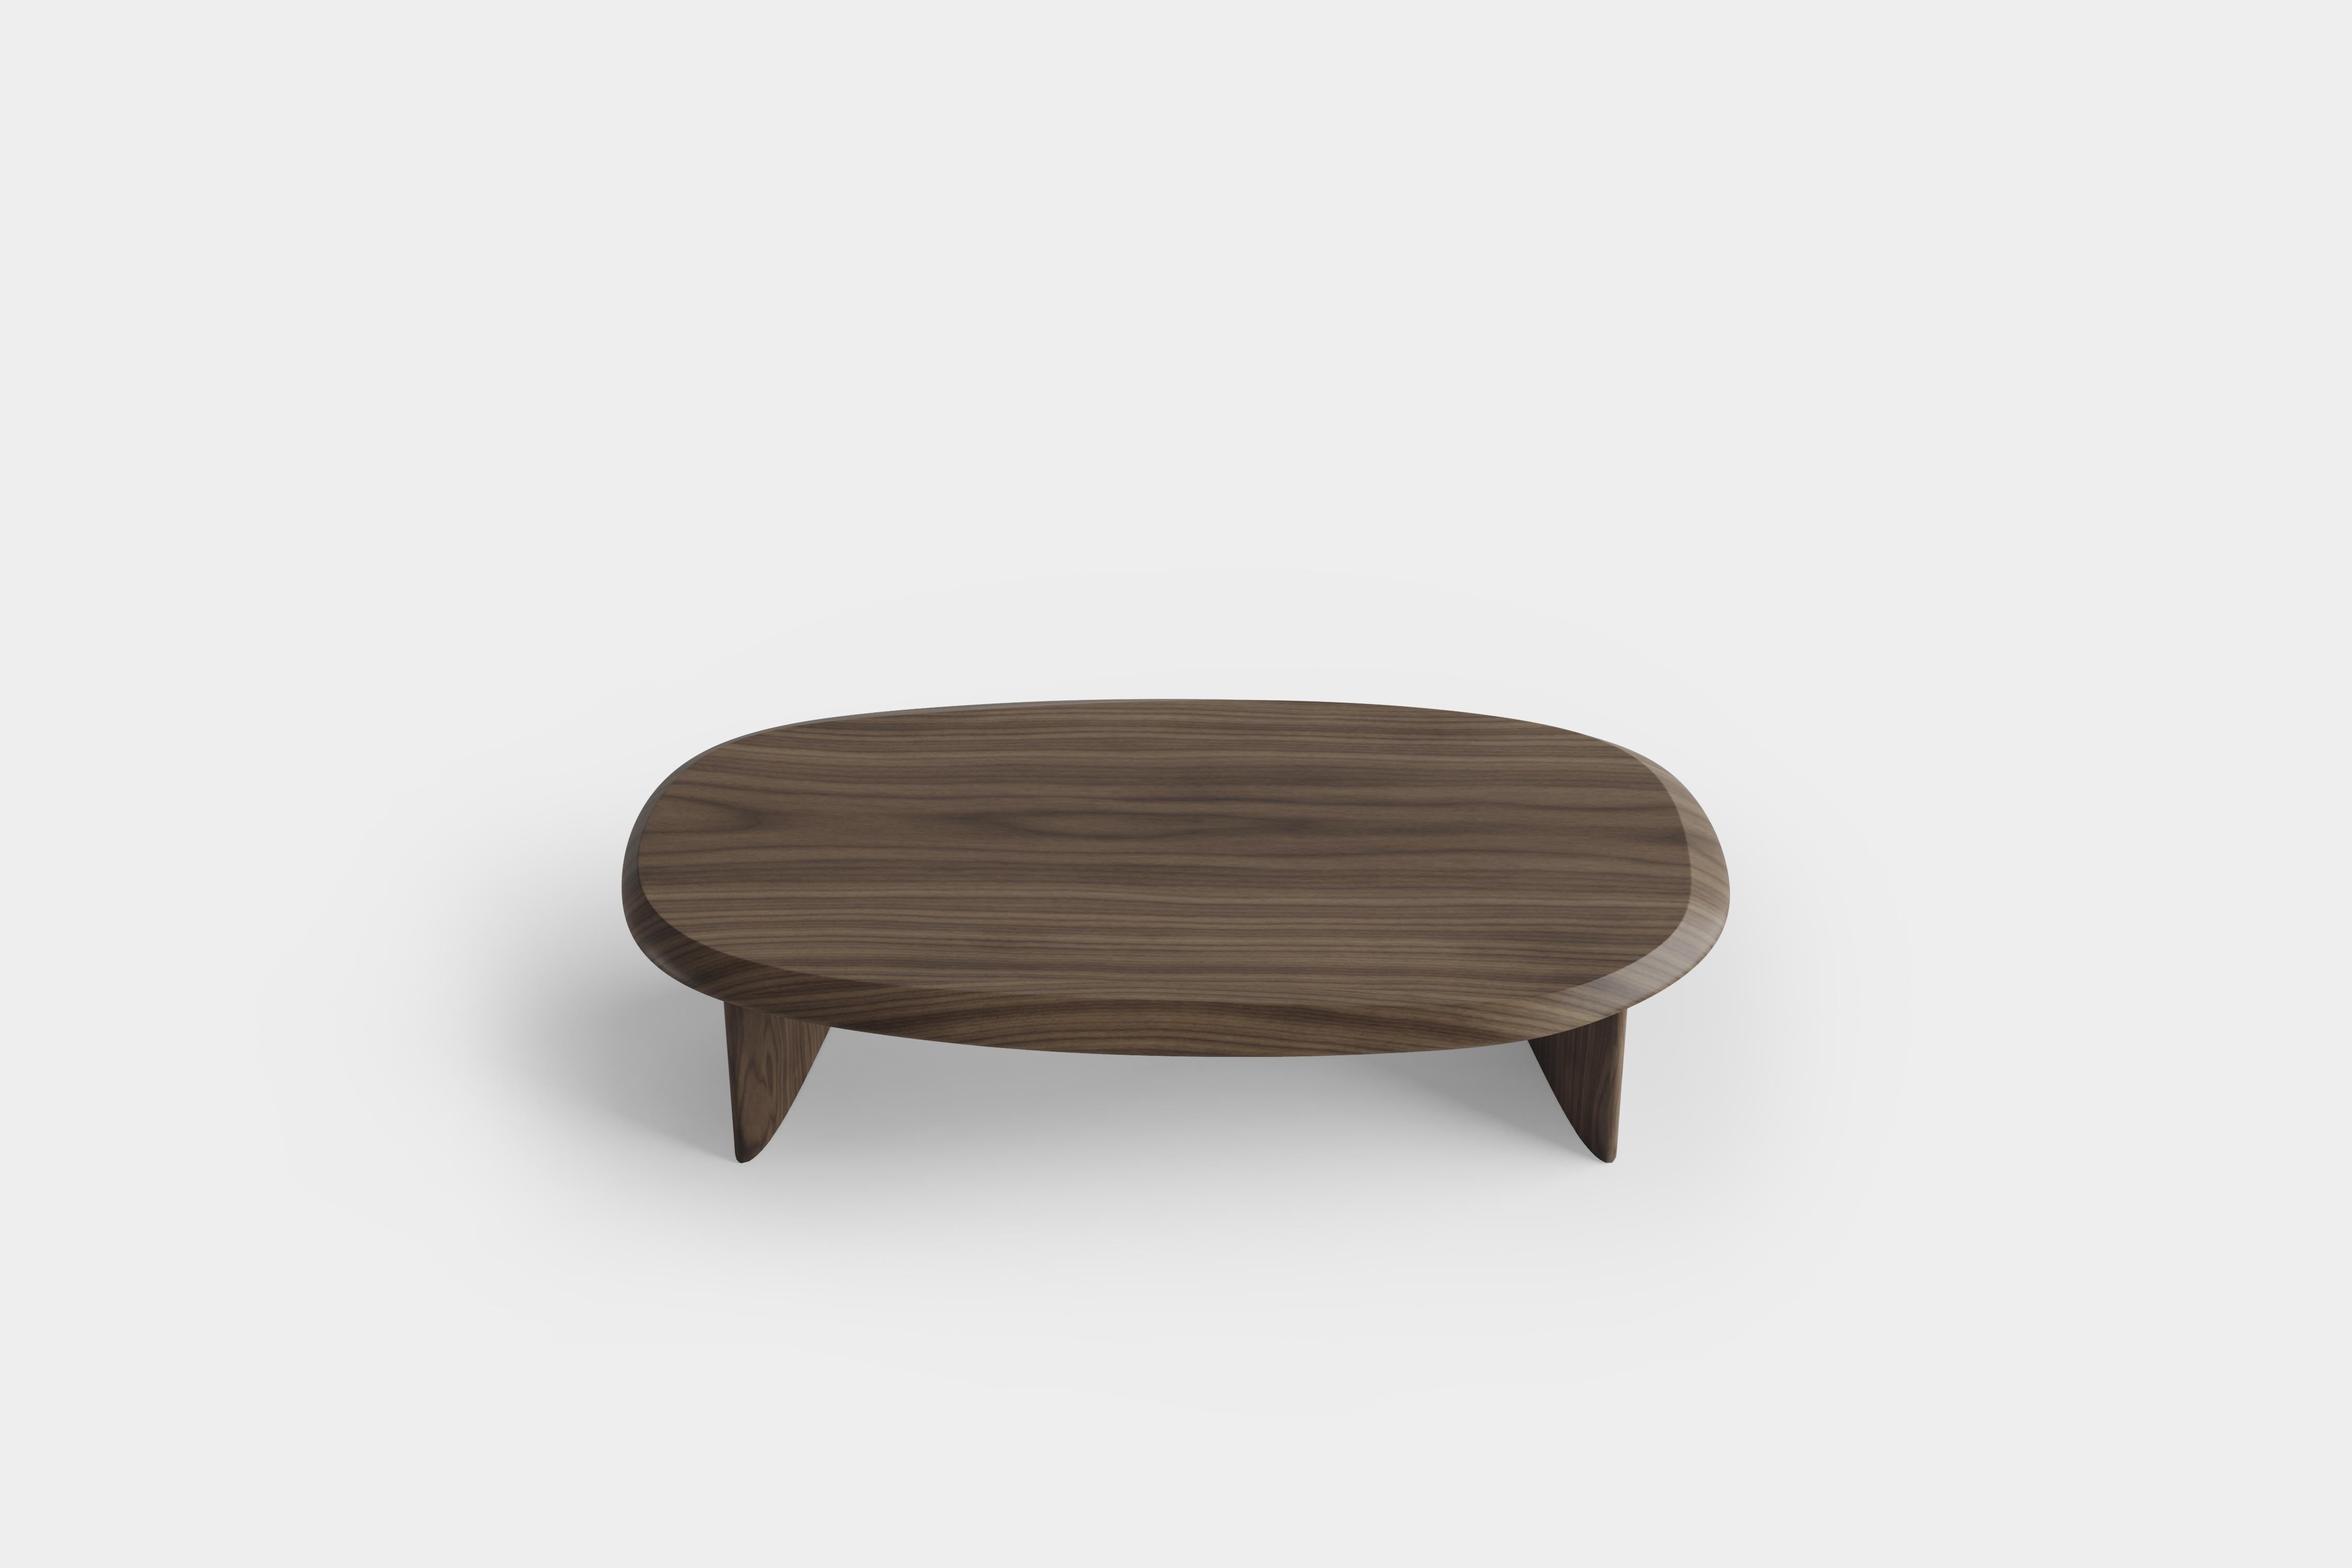 Mexican Duna Rectangular Coffee Table in Solid Walnut Wood Coffee Table by Joel Escalona For Sale